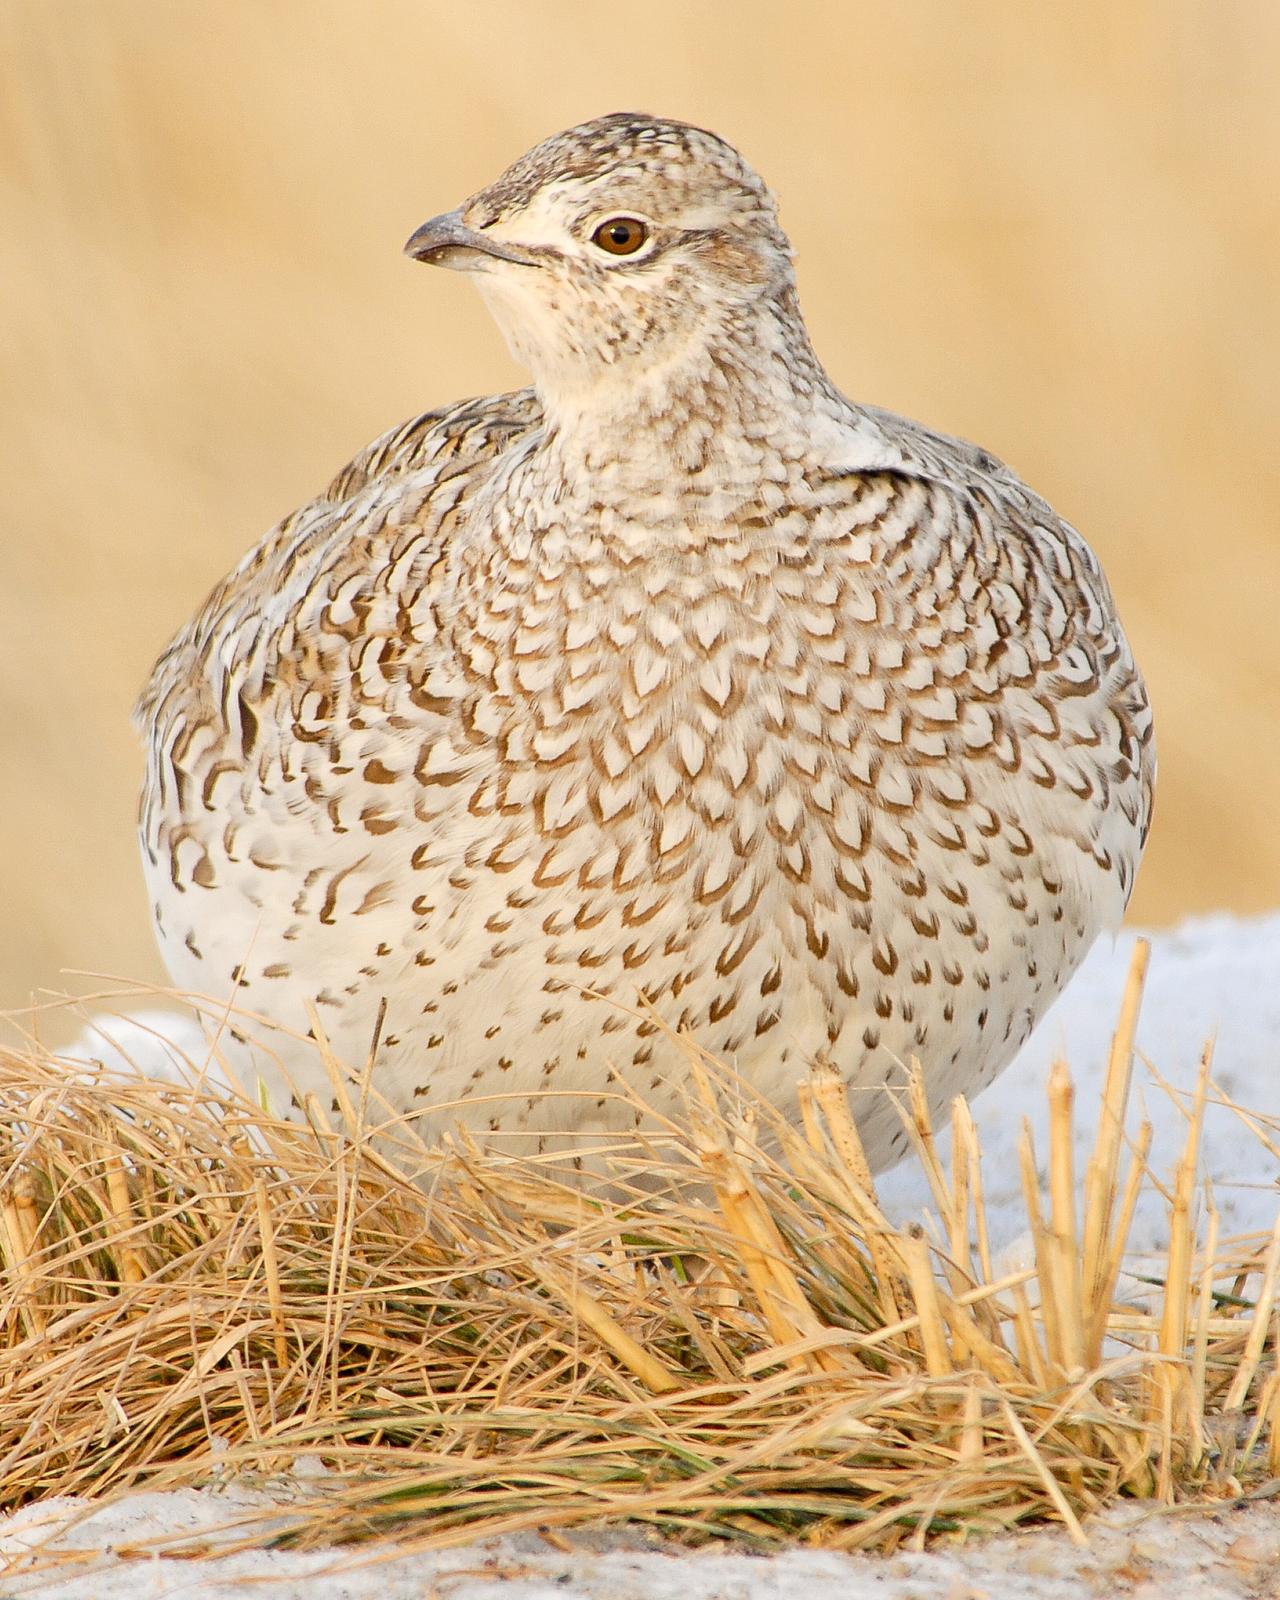 Sharp-tailed Grouse Photo by Mike Fish